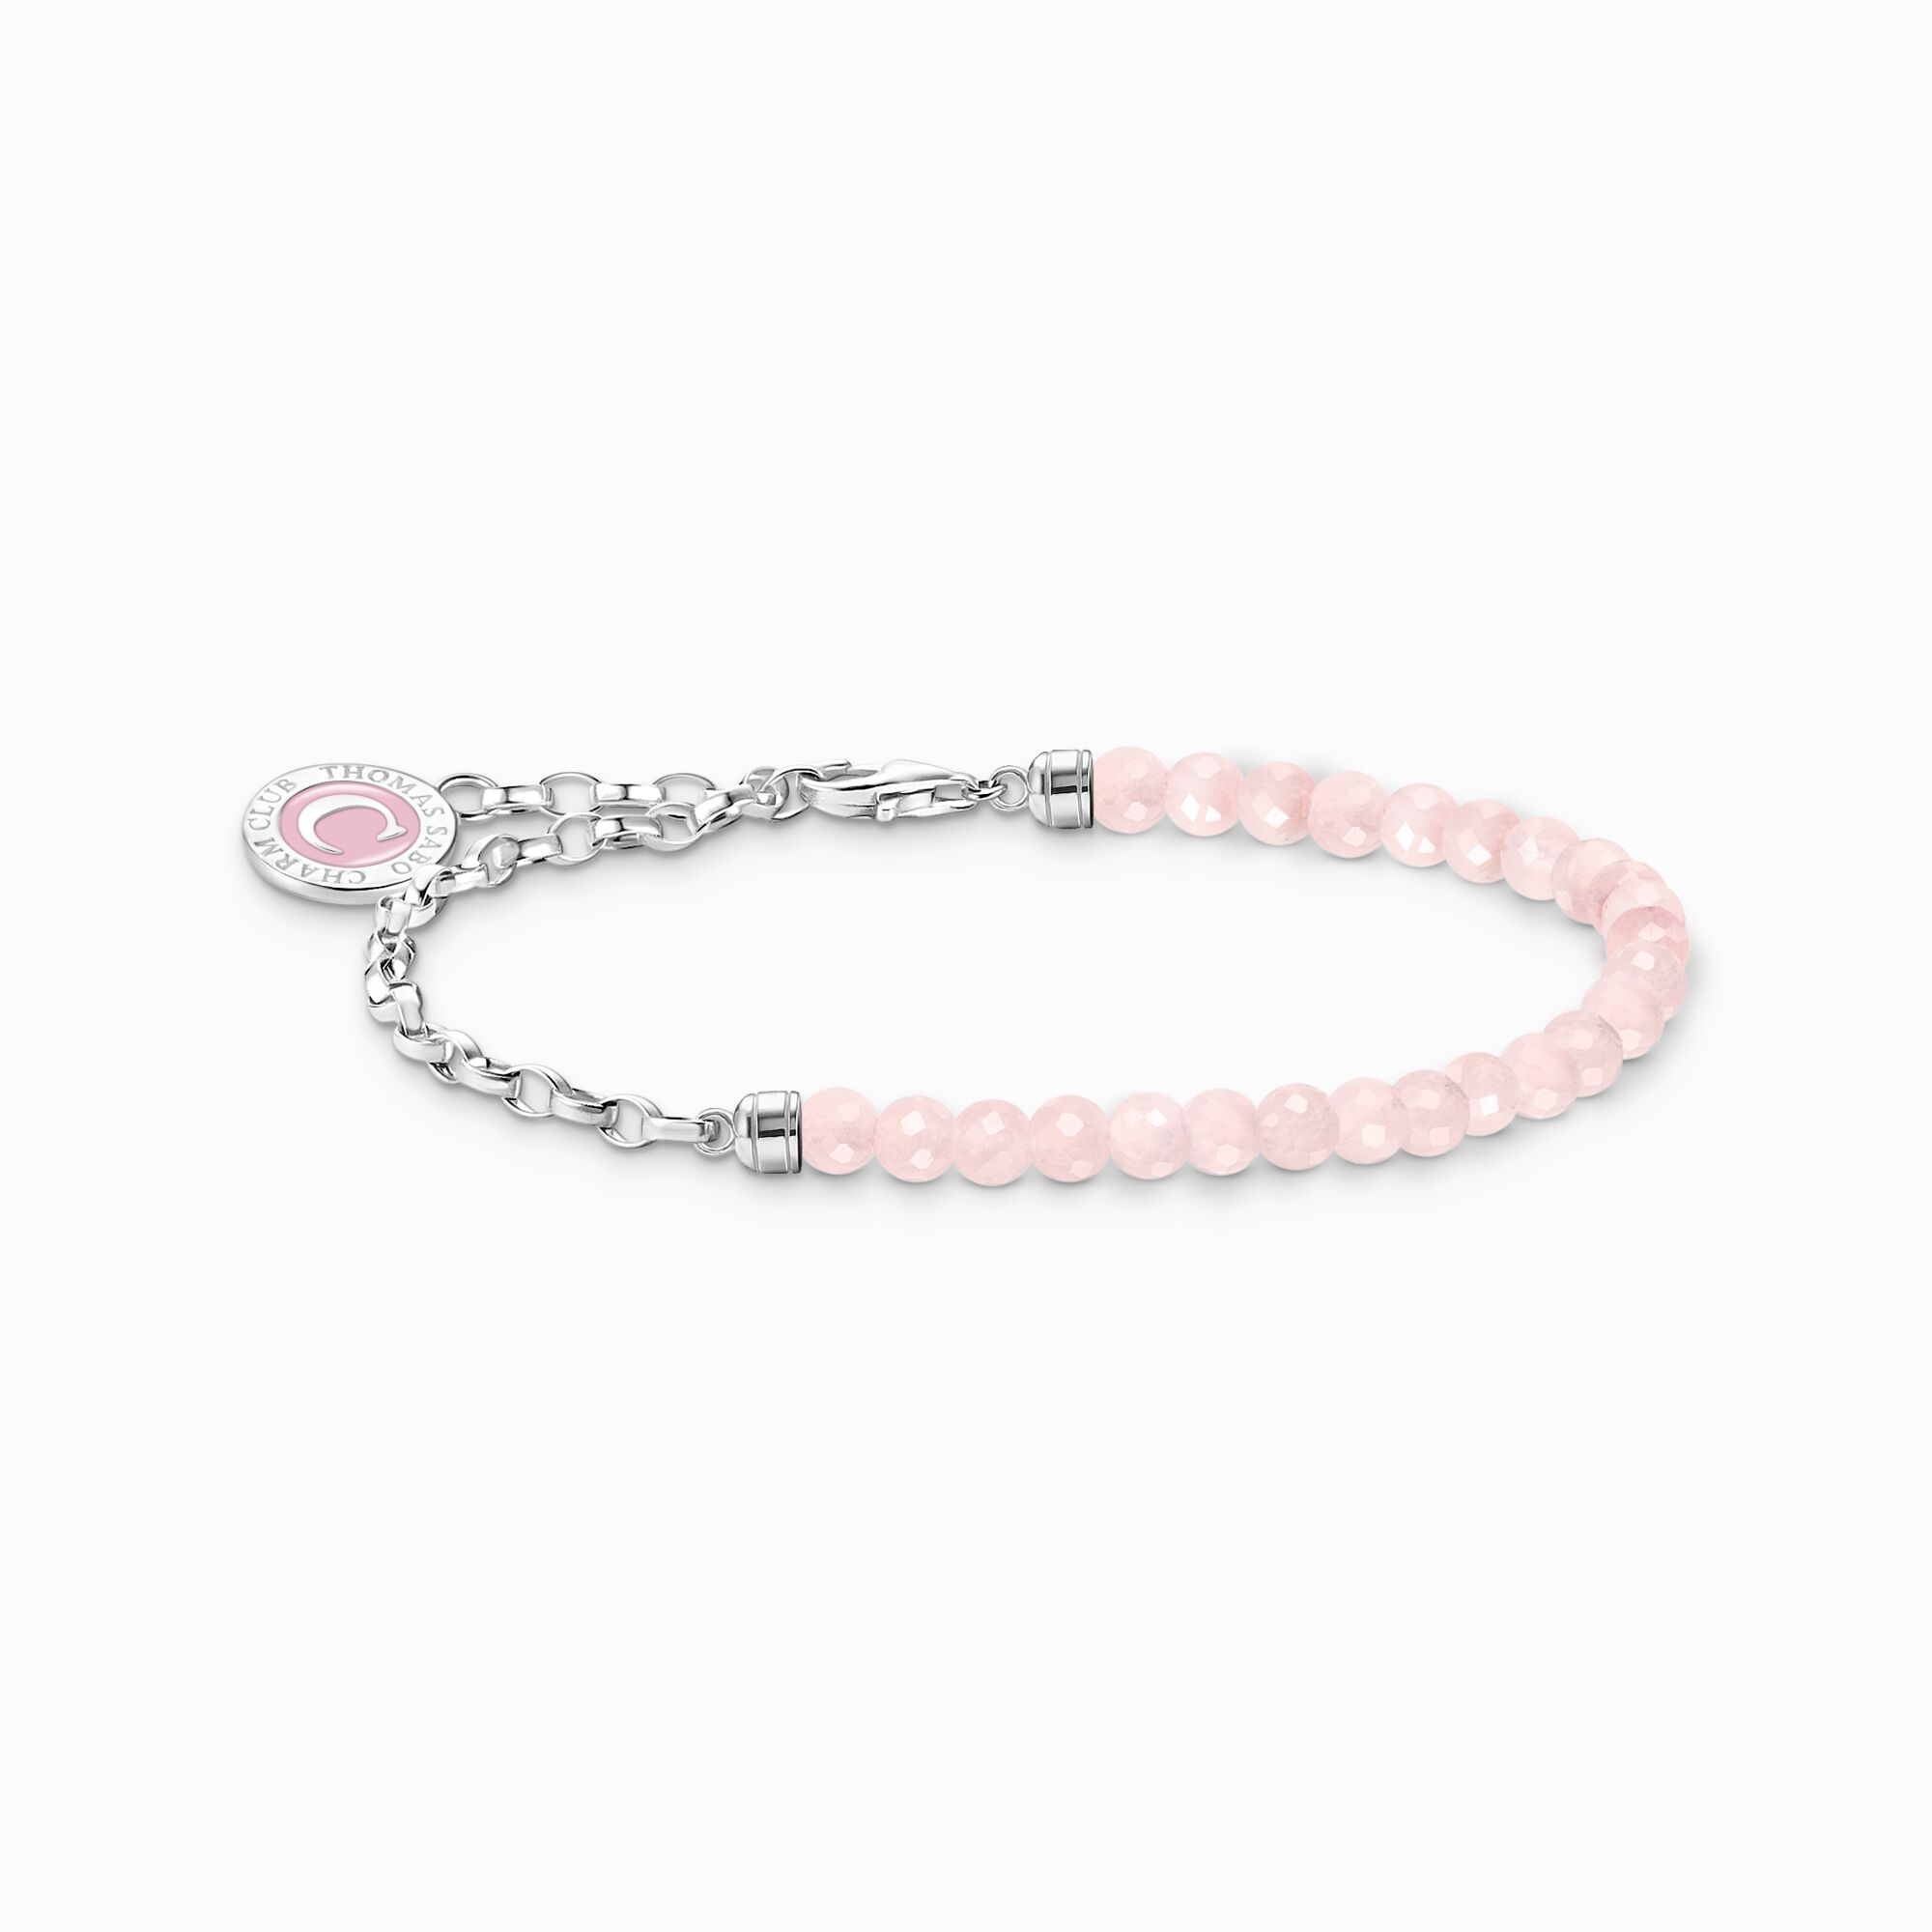 Member Charm bracelet with beads of rose quartz and Charmista Coin silver from the Charm Club collection in the THOMAS SABO online store